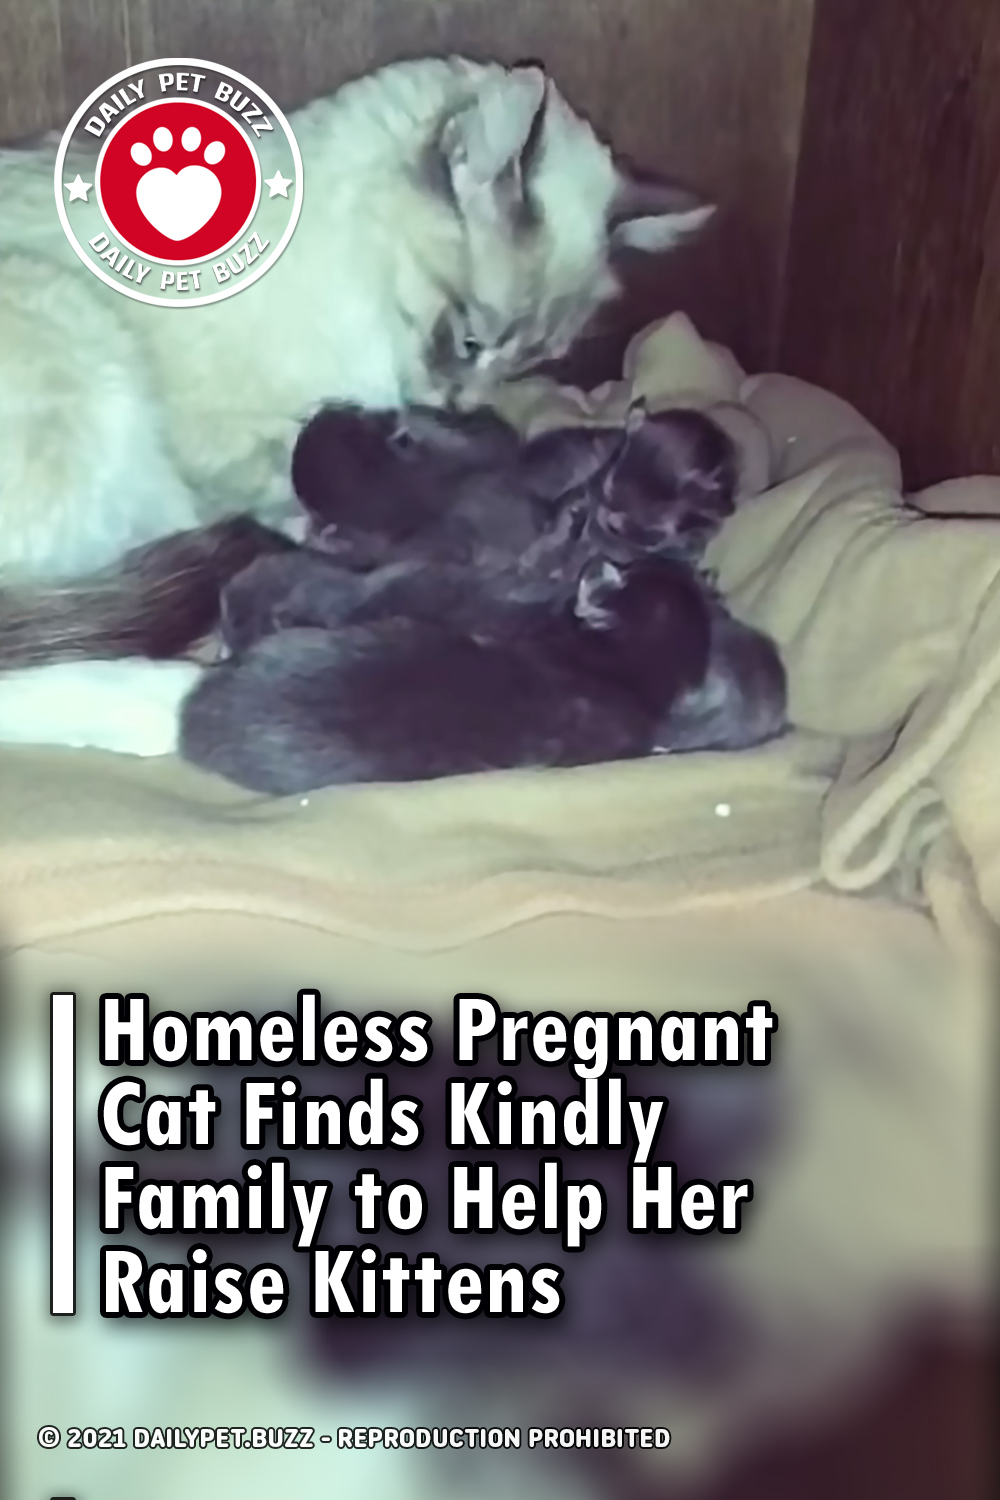 Homeless Pregnant Cat Finds Kindly Family to Help Her Raise Kittens